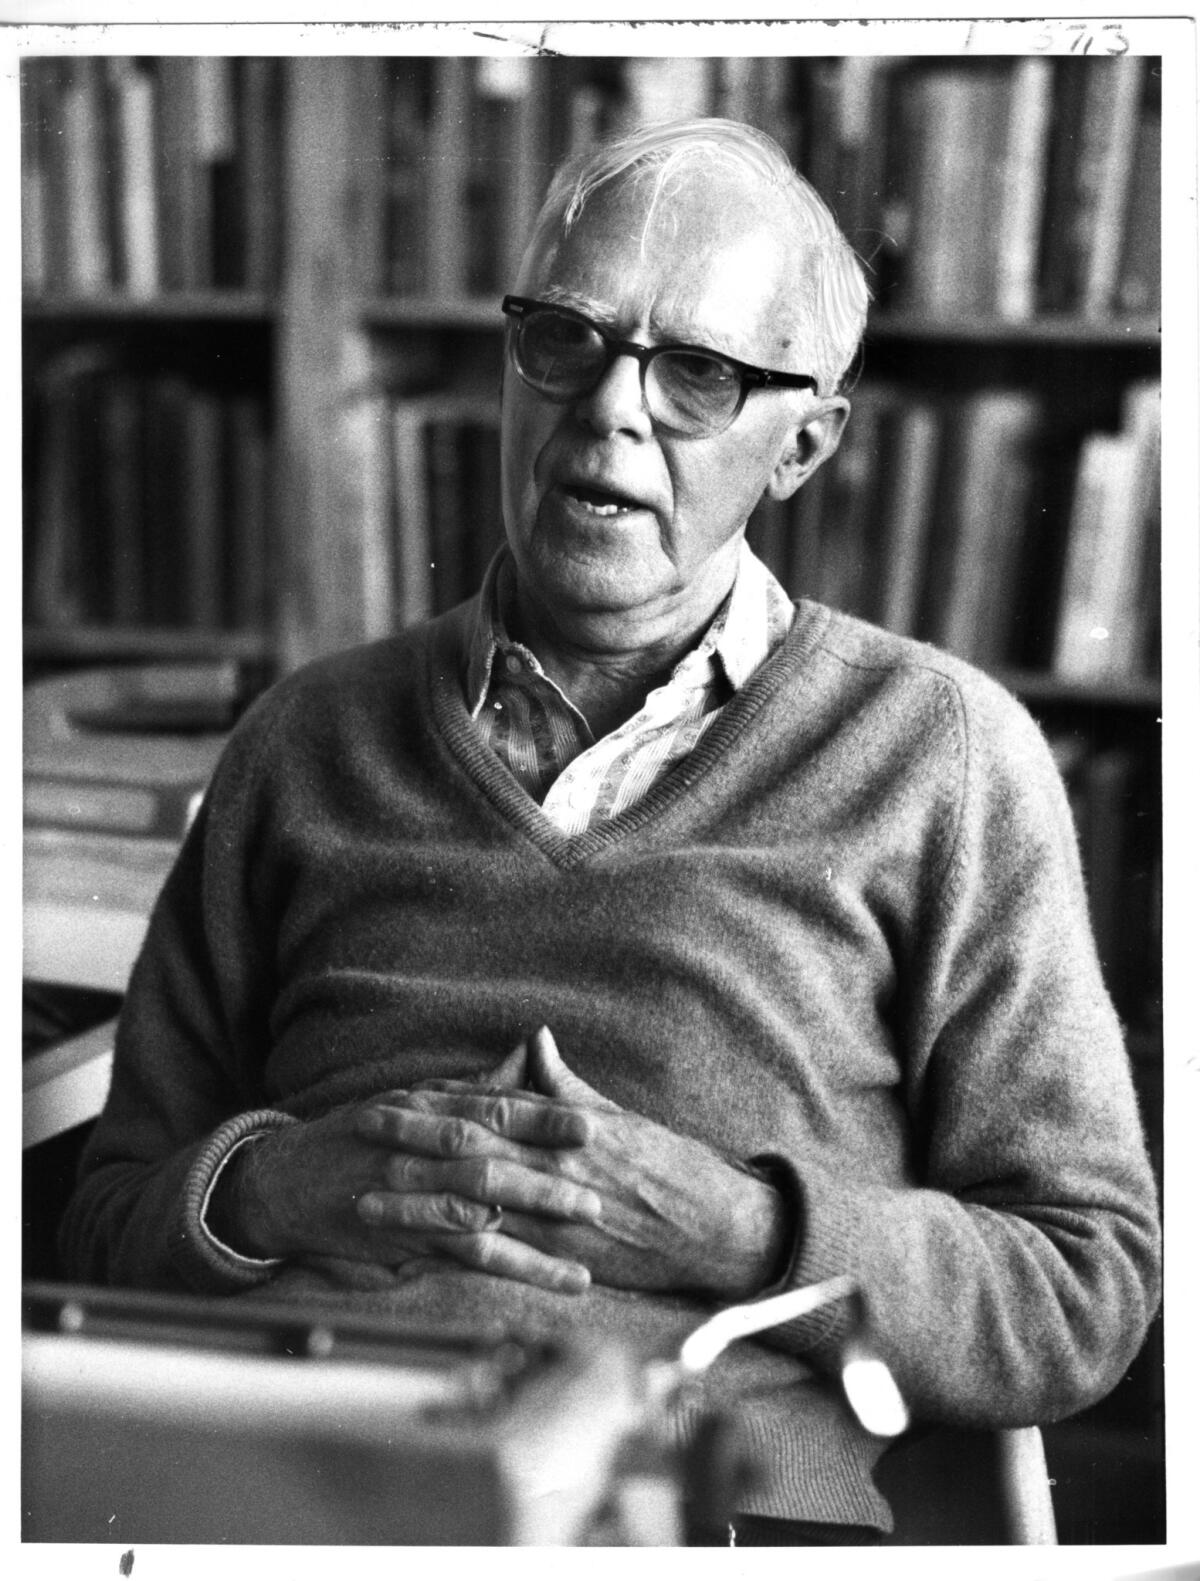 Martin Gardner, a prolific mathematics and science writer known for popularizing recreational and debunking paranormal claims.